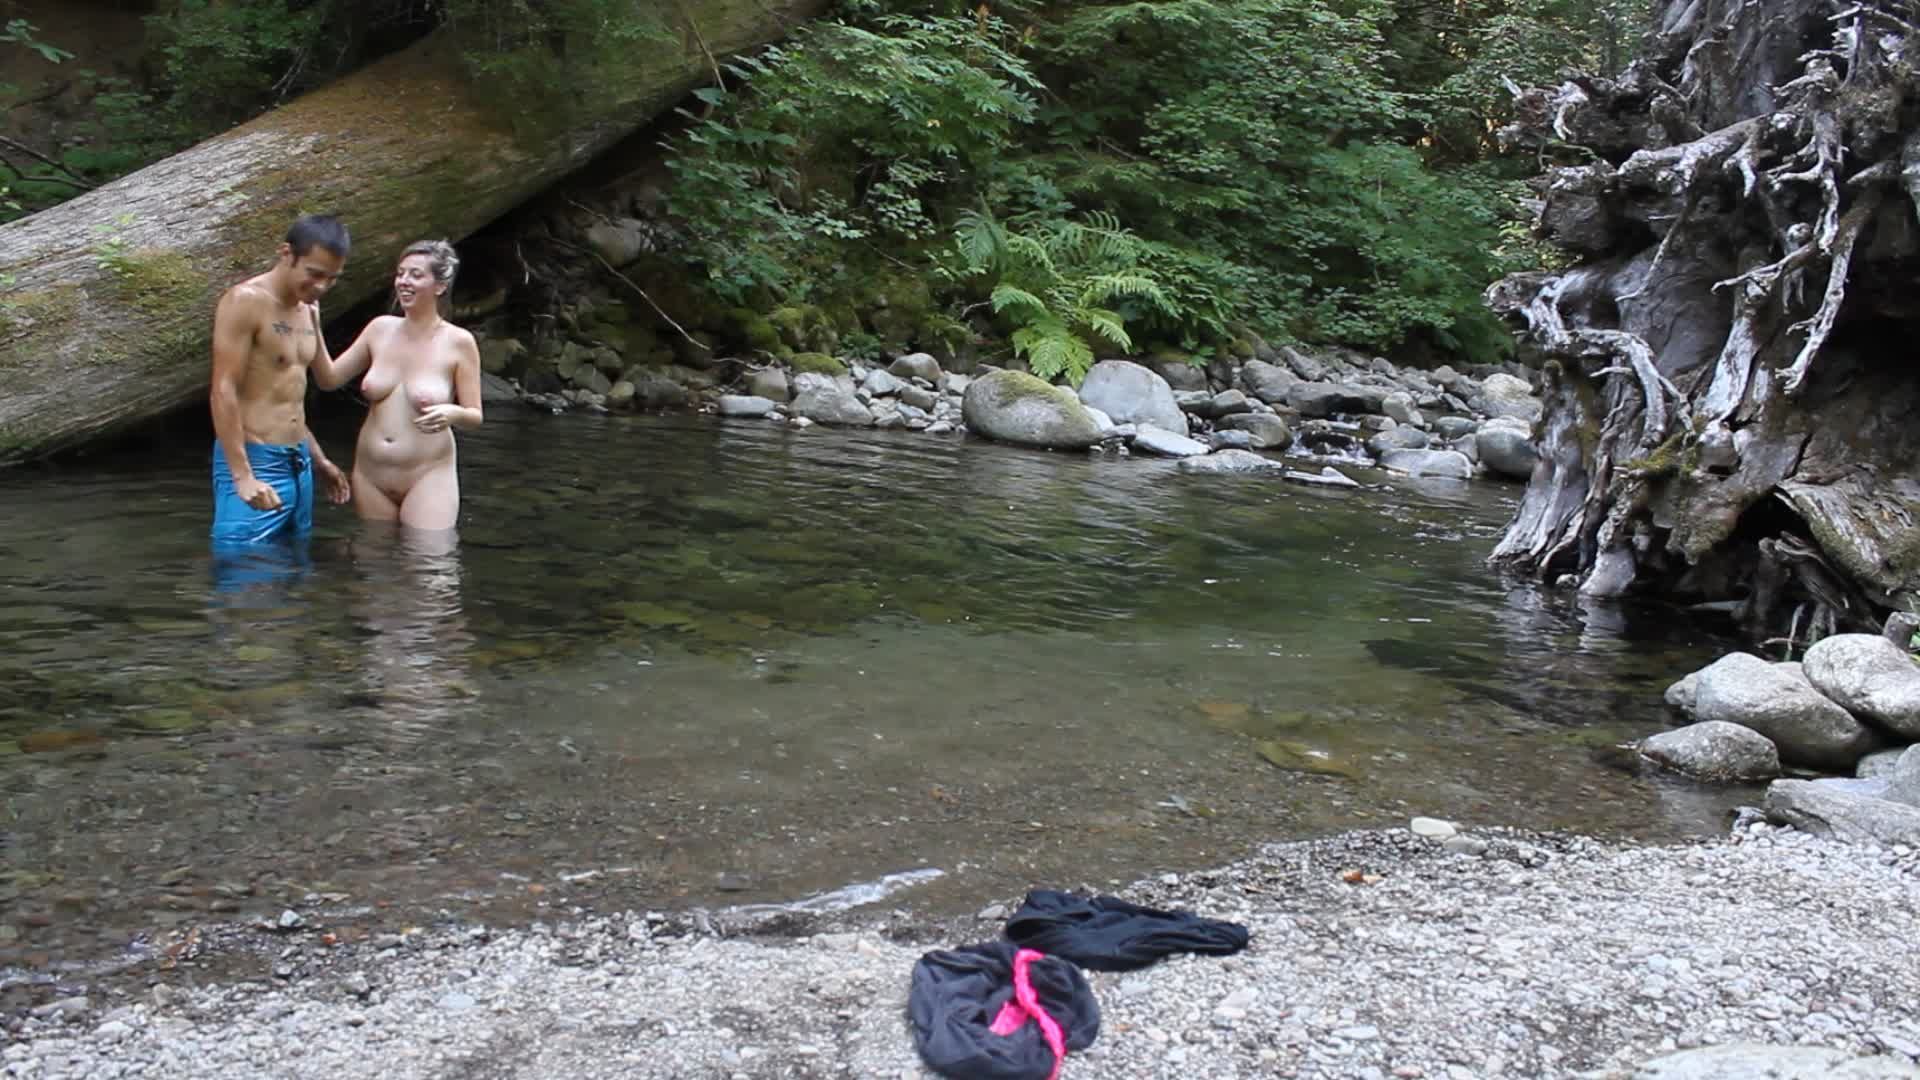 Couple goes skinny dipping and makes out